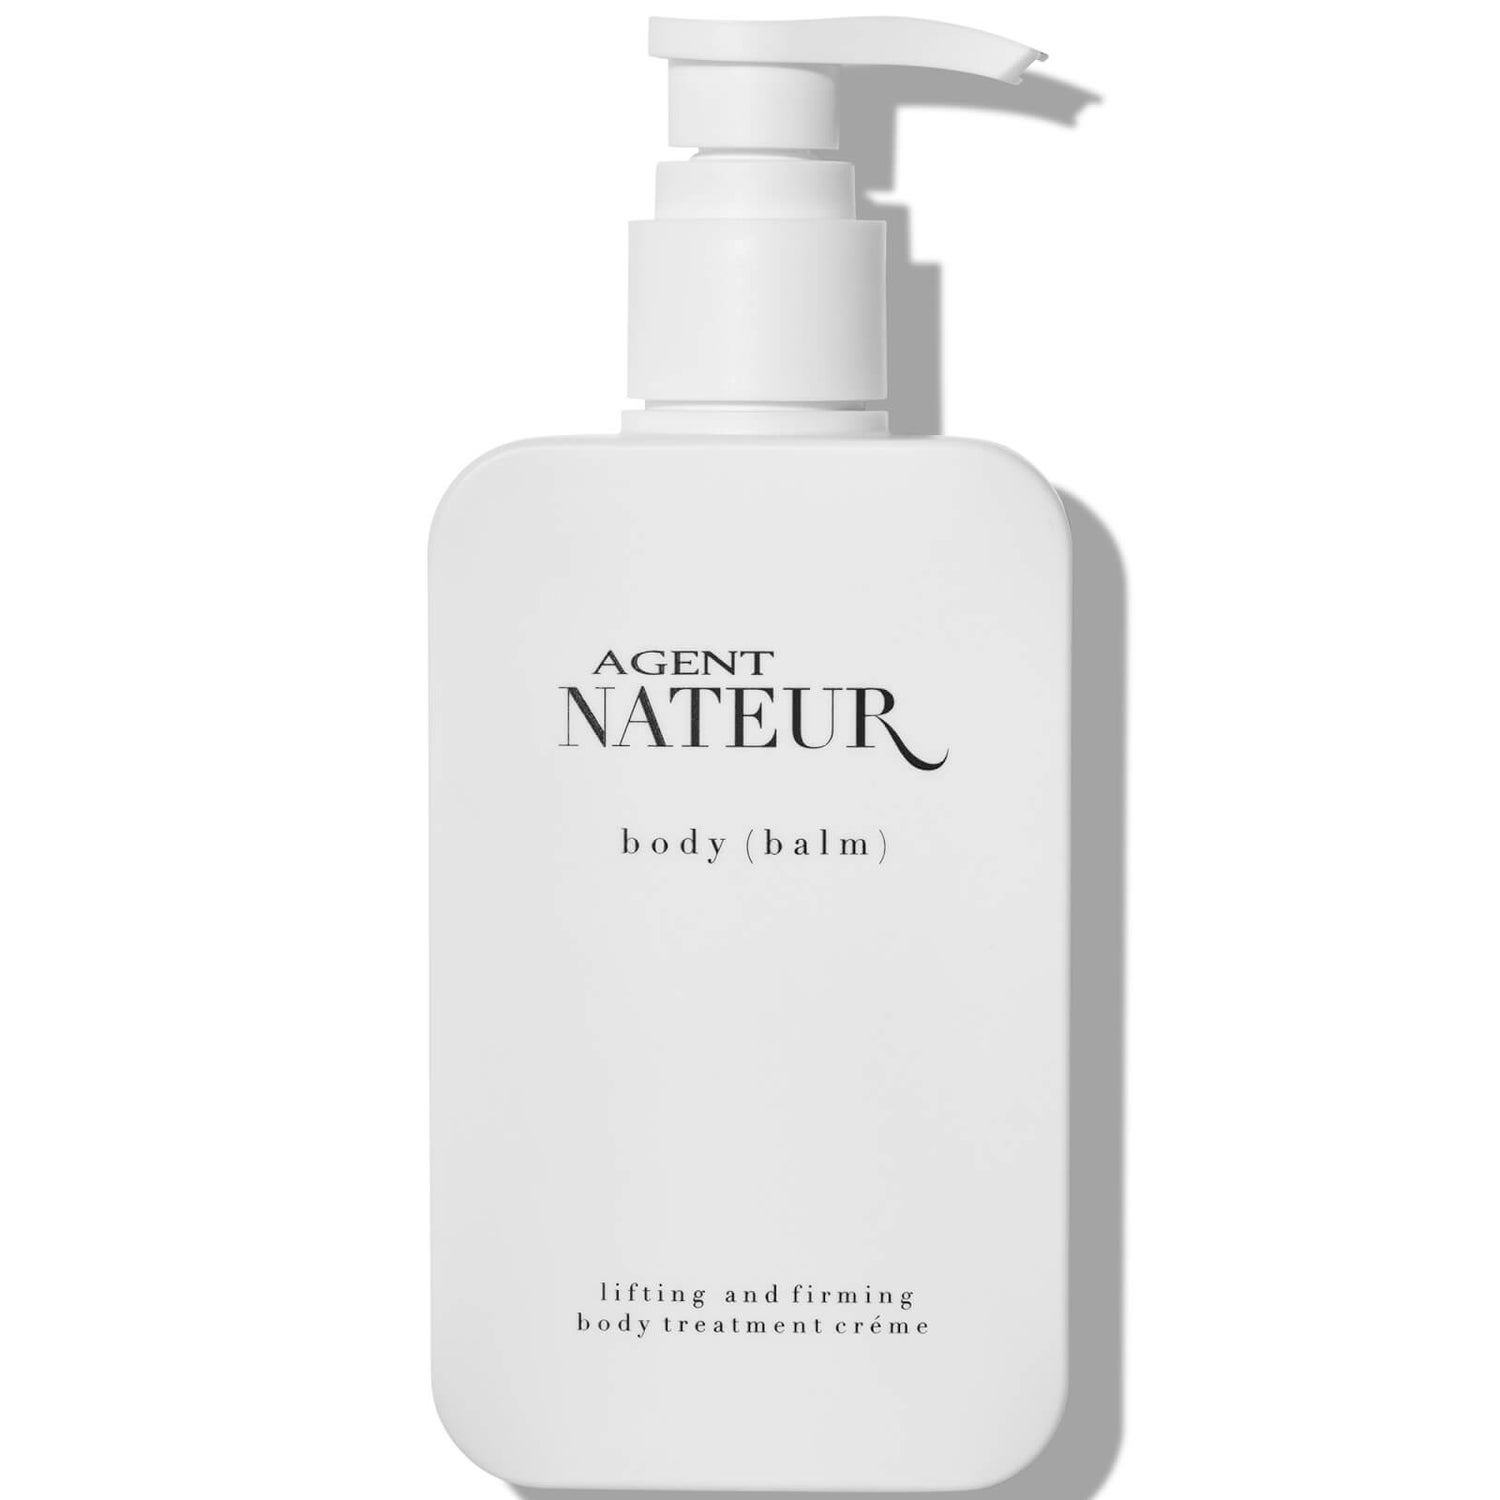 AGENT NATEUR Body (Balm) Lifting and Firming Body Treatment Crème 200ml